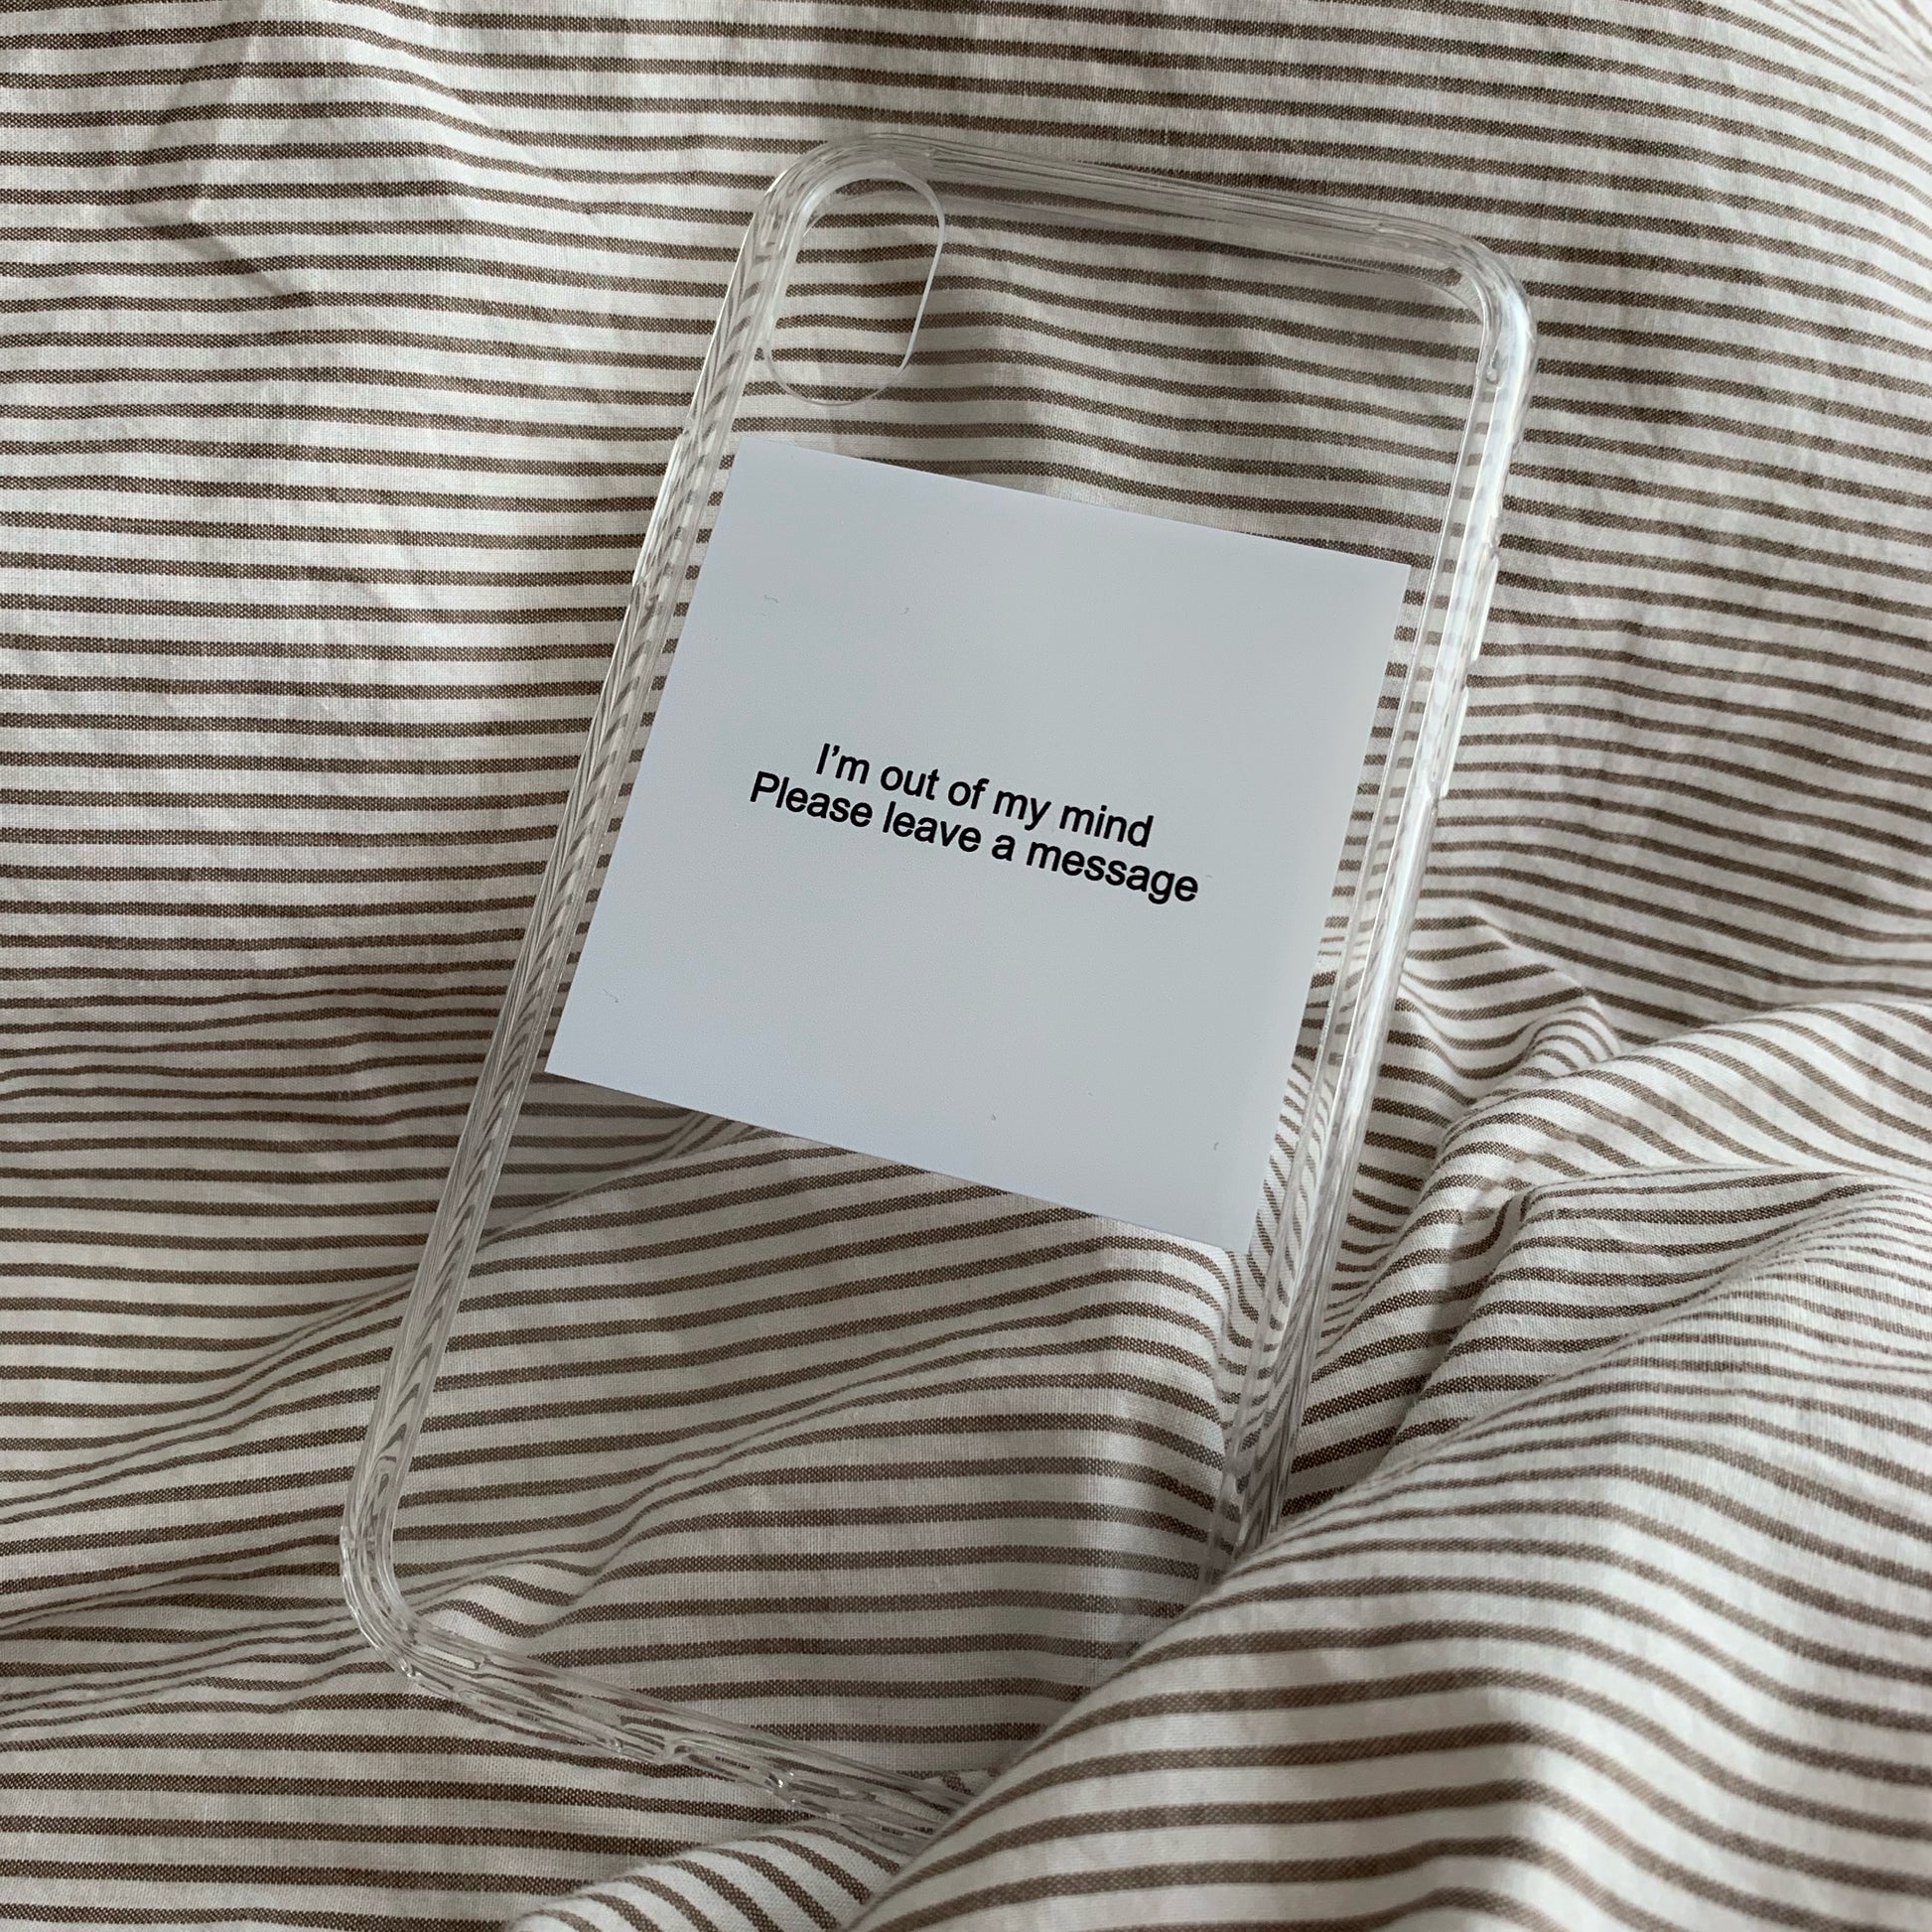 Leave A Message iPhone Case - Dreamer Store